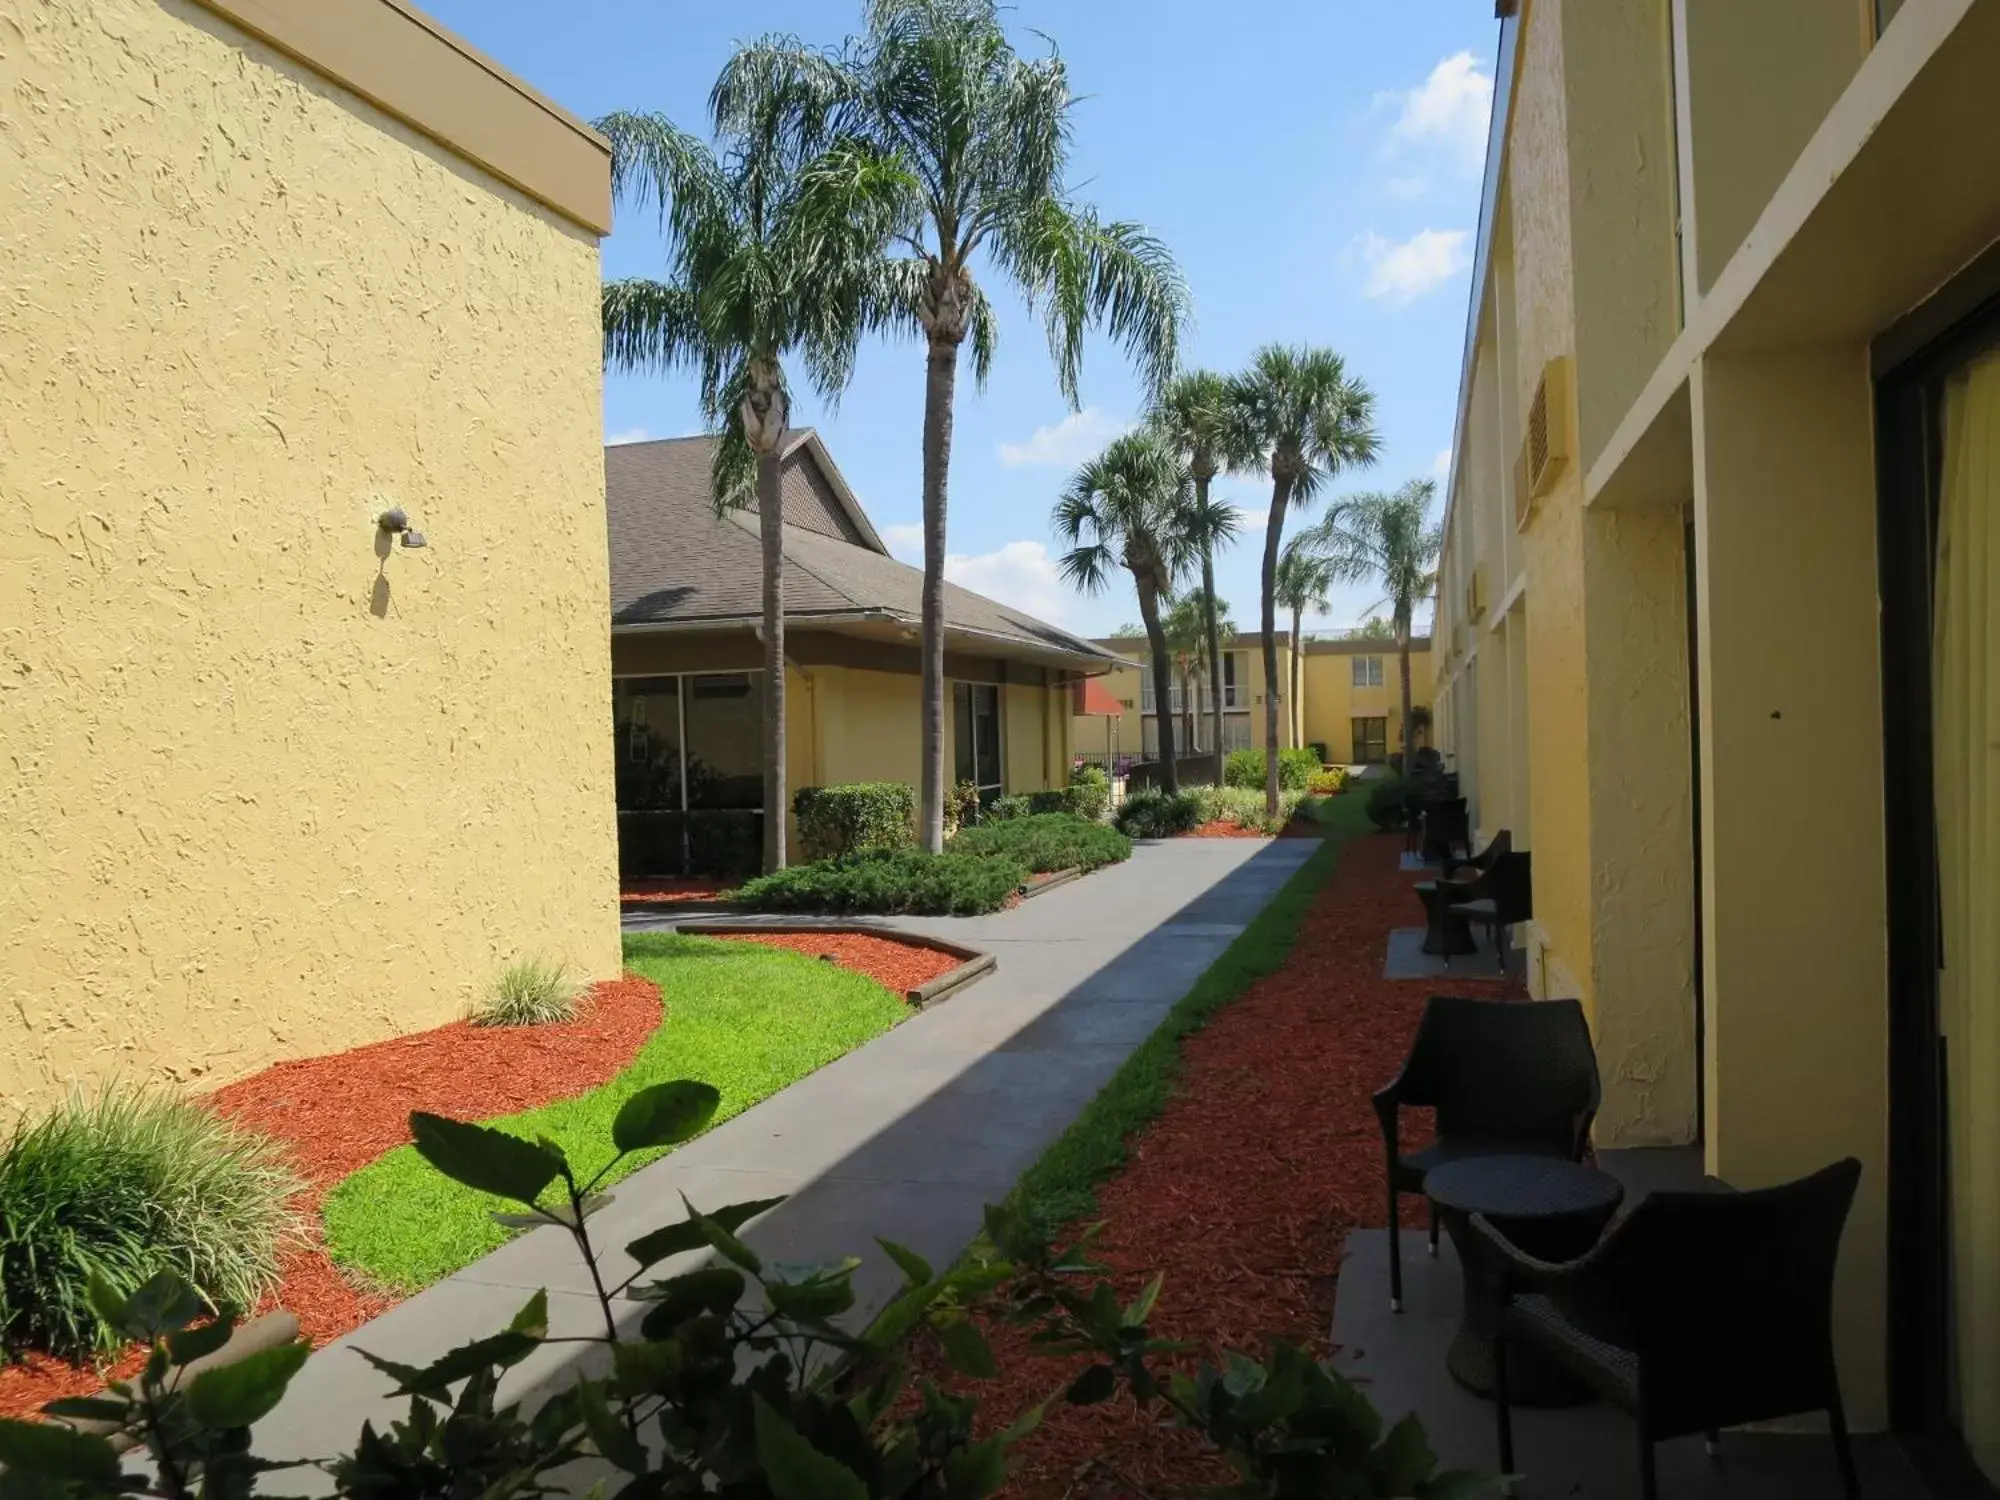 Area and facilities, Property Building in Floridian Express International Drive